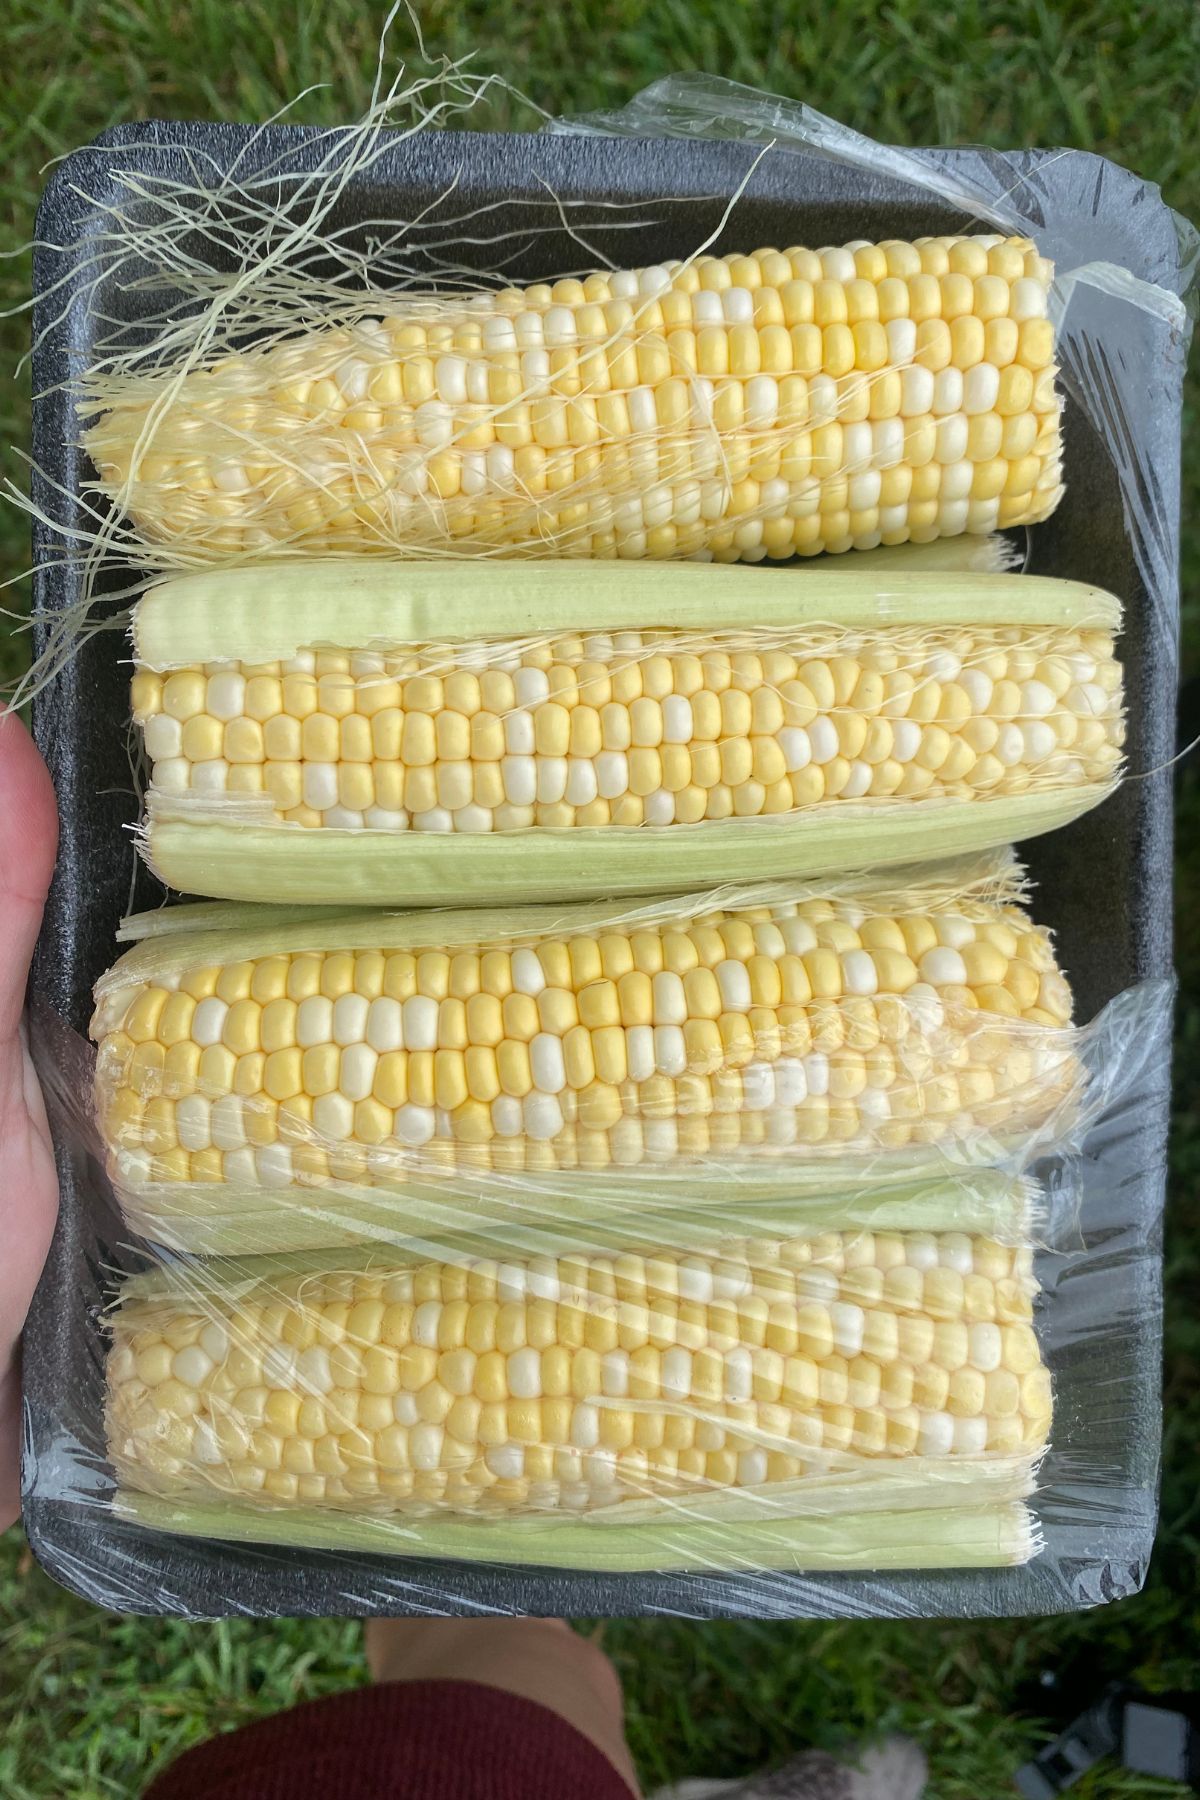 Corn on the cob in a plastic container.